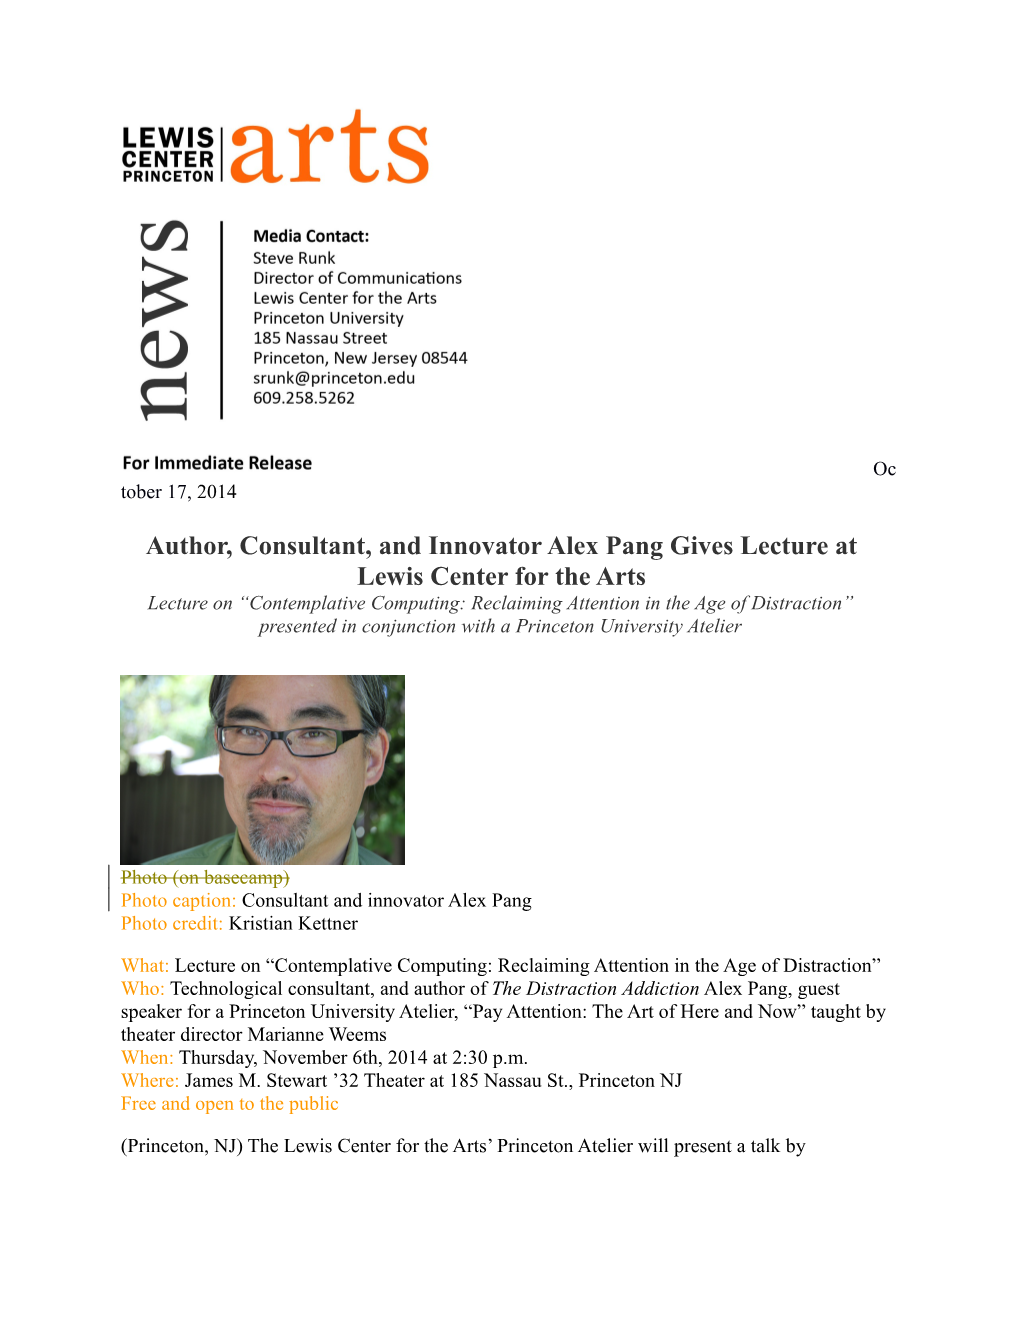 Author, Consultant, and Innovator Alex Pang Gives Lecture at Lewis Center for the Arts